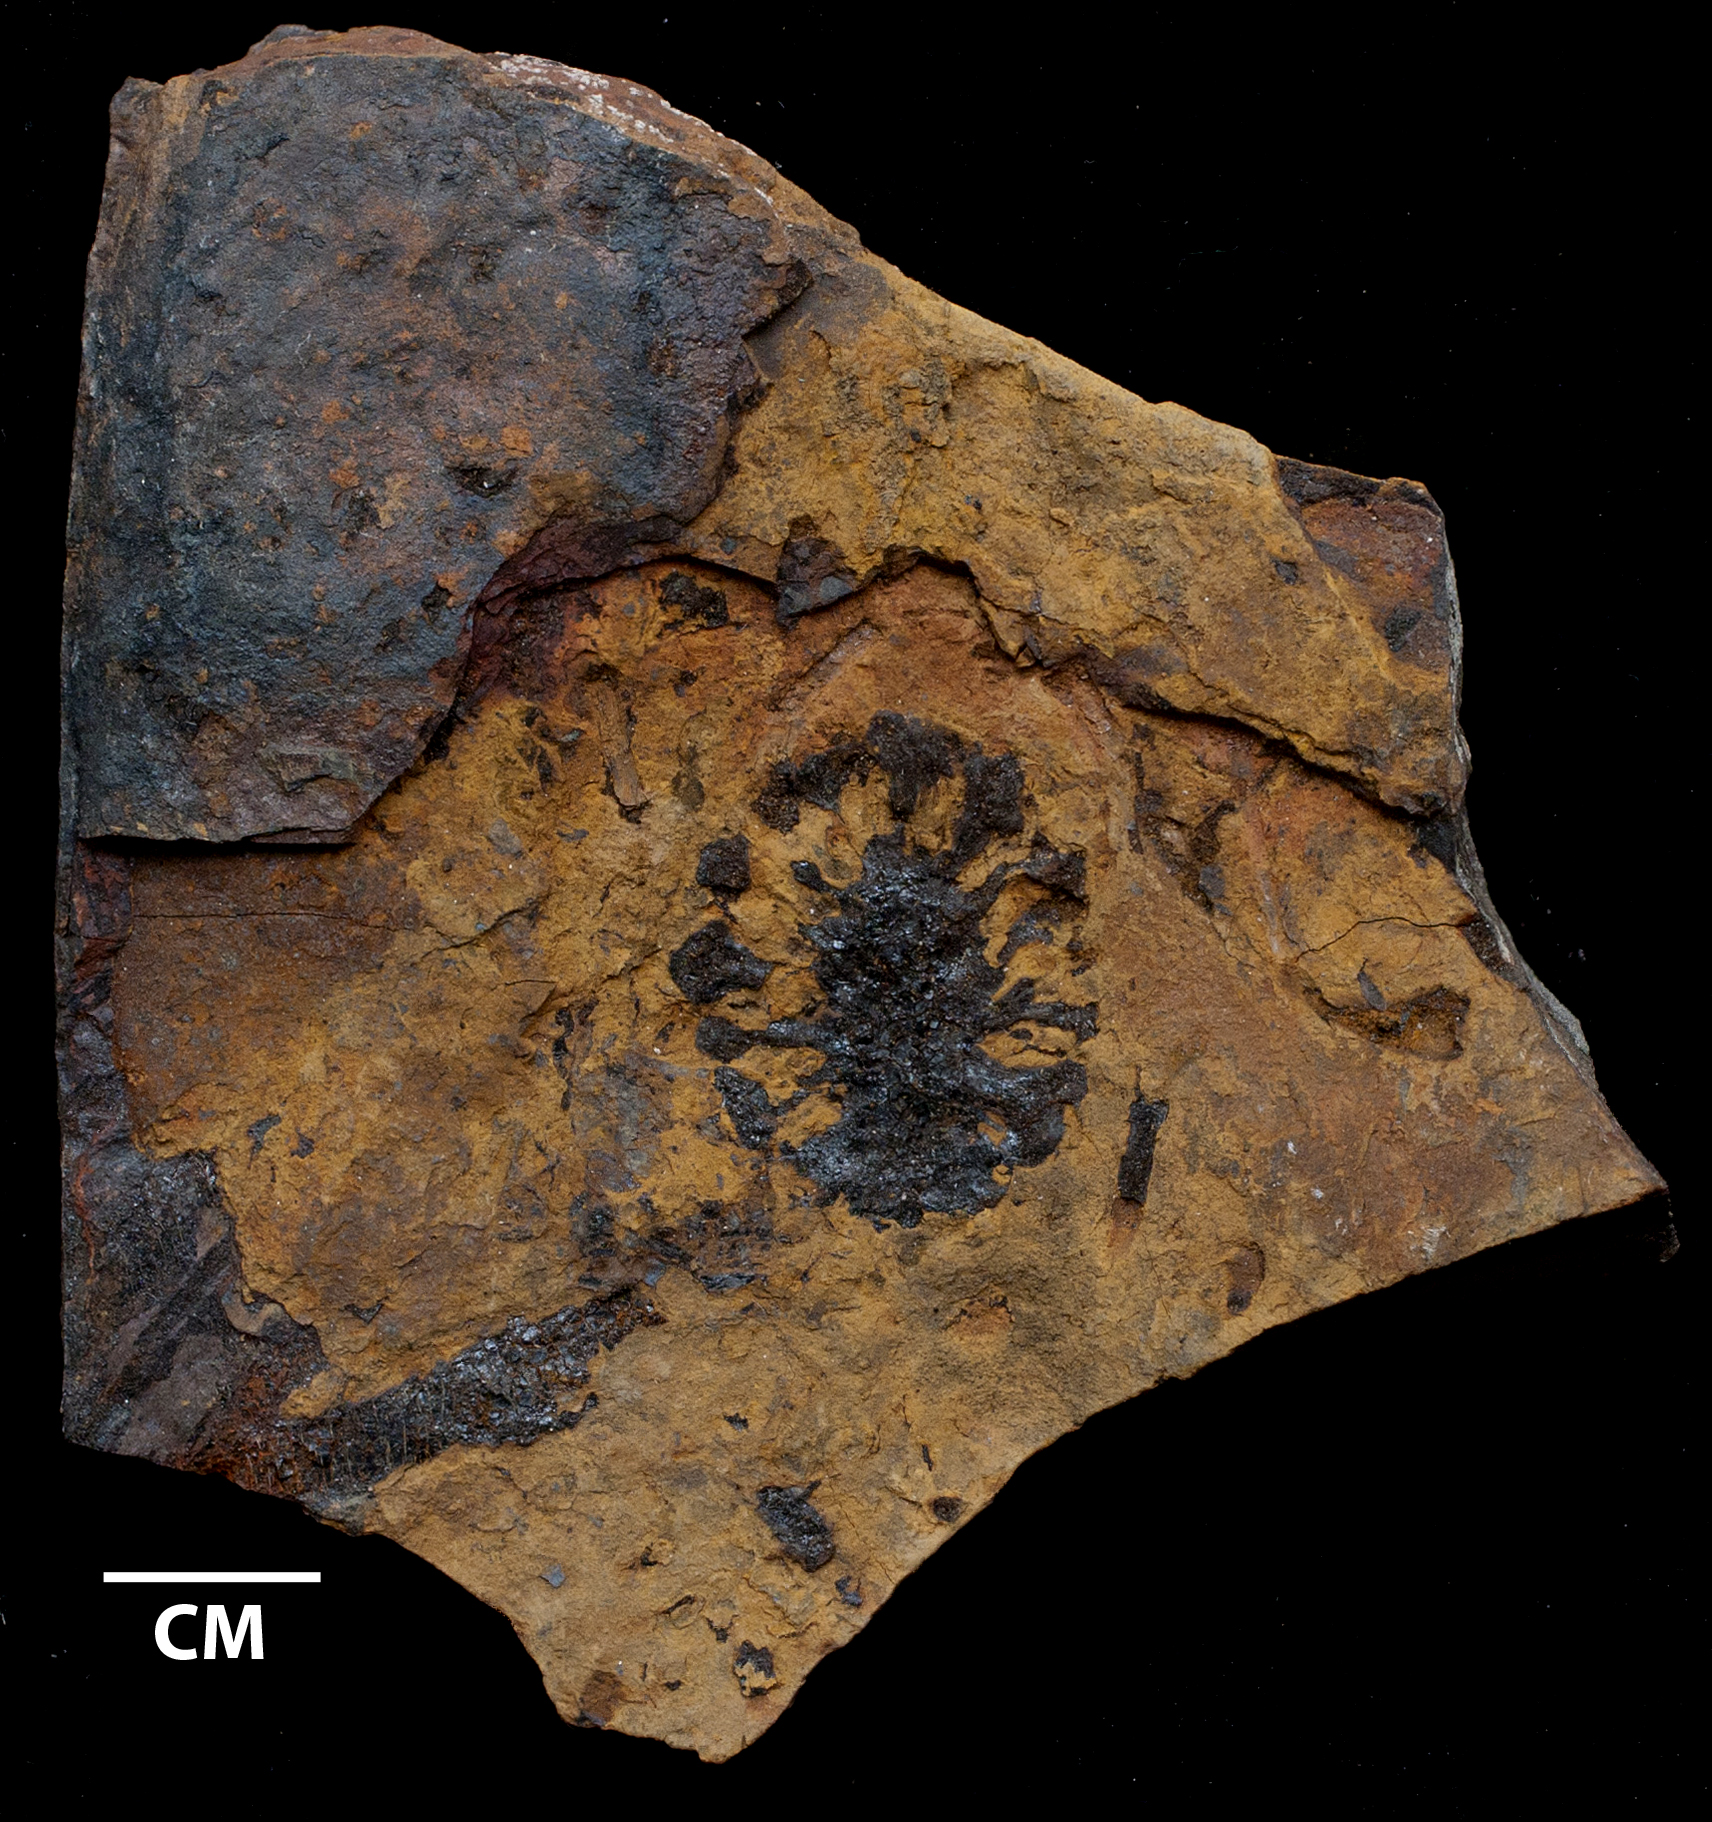 Conites sp., UMPC 913, a seed cone from the Kootenai Formation near Great Falls, MT which ranges from 100-146 million years ago. 